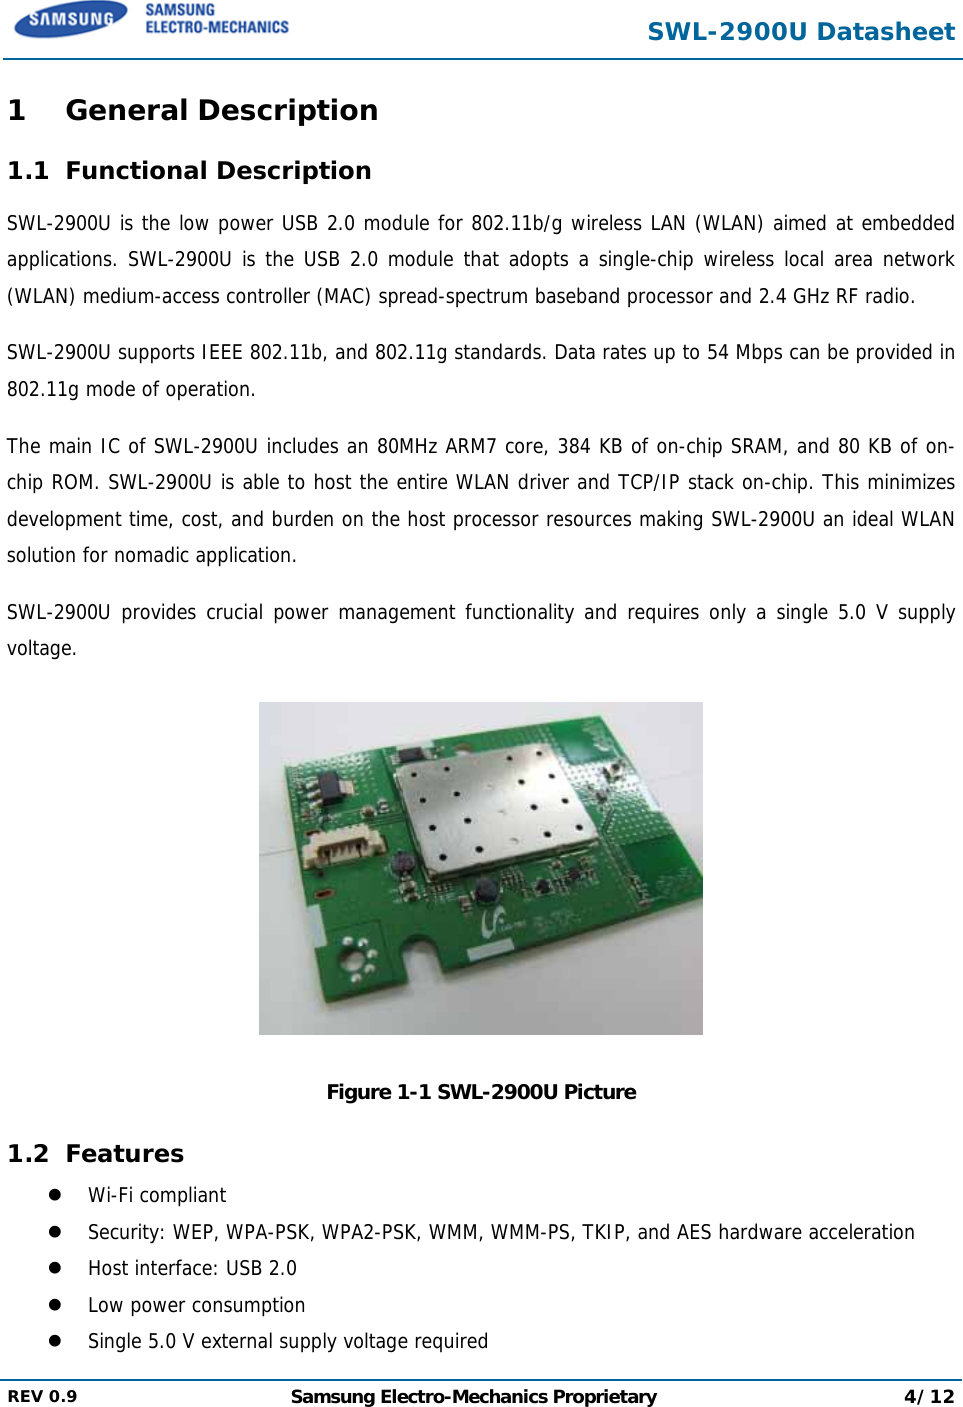  SWL-2900U Datasheet  REV 0.9  Samsung Electro-Mechanics Proprietary 4/12  1 General Description 1.1 Functional Description SWL-2900U is the low power USB 2.0 module for 802.11b/g wireless LAN (WLAN) aimed at embedded applications. SWL-2900U is the USB 2.0 module that adopts a single-chip wireless local area network (WLAN) medium-access controller (MAC) spread-spectrum baseband processor and 2.4 GHz RF radio. SWL-2900U supports IEEE 802.11b, and 802.11g standards. Data rates up to 54 Mbps can be provided in 802.11g mode of operation. The main IC of SWL-2900U includes an 80MHz ARM7 core, 384 KB of on-chip SRAM, and 80 KB of on-chip ROM. SWL-2900U is able to host the entire WLAN driver and TCP/IP stack on-chip. This minimizes development time, cost, and burden on the host processor resources making SWL-2900U an ideal WLAN solution for nomadic application. SWL-2900U provides crucial power management functionality and requires only a single 5.0 V supply voltage.  Figure 1-1 SWL-2900U Picture 1.2 Features z Wi-Fi compliant z Security: WEP, WPA-PSK, WPA2-PSK, WMM, WMM-PS, TKIP, and AES hardware acceleration z Host interface: USB 2.0  z Low power consumption z Single 5.0 V external supply voltage required 